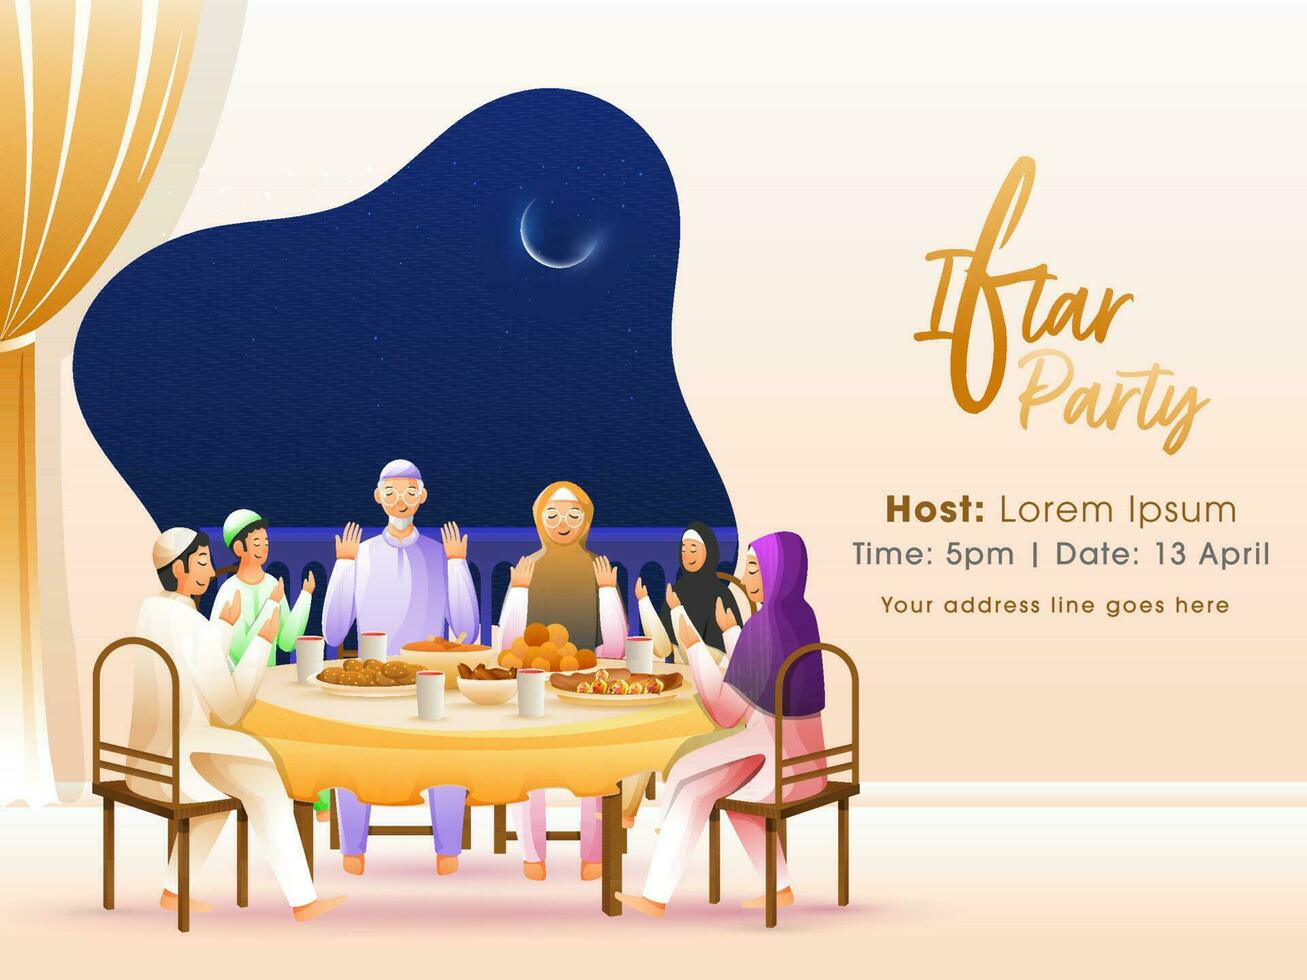 Illustration Of Muslim Family Praying Before Iftar Dinner During Ramadan Feast At Home. vector